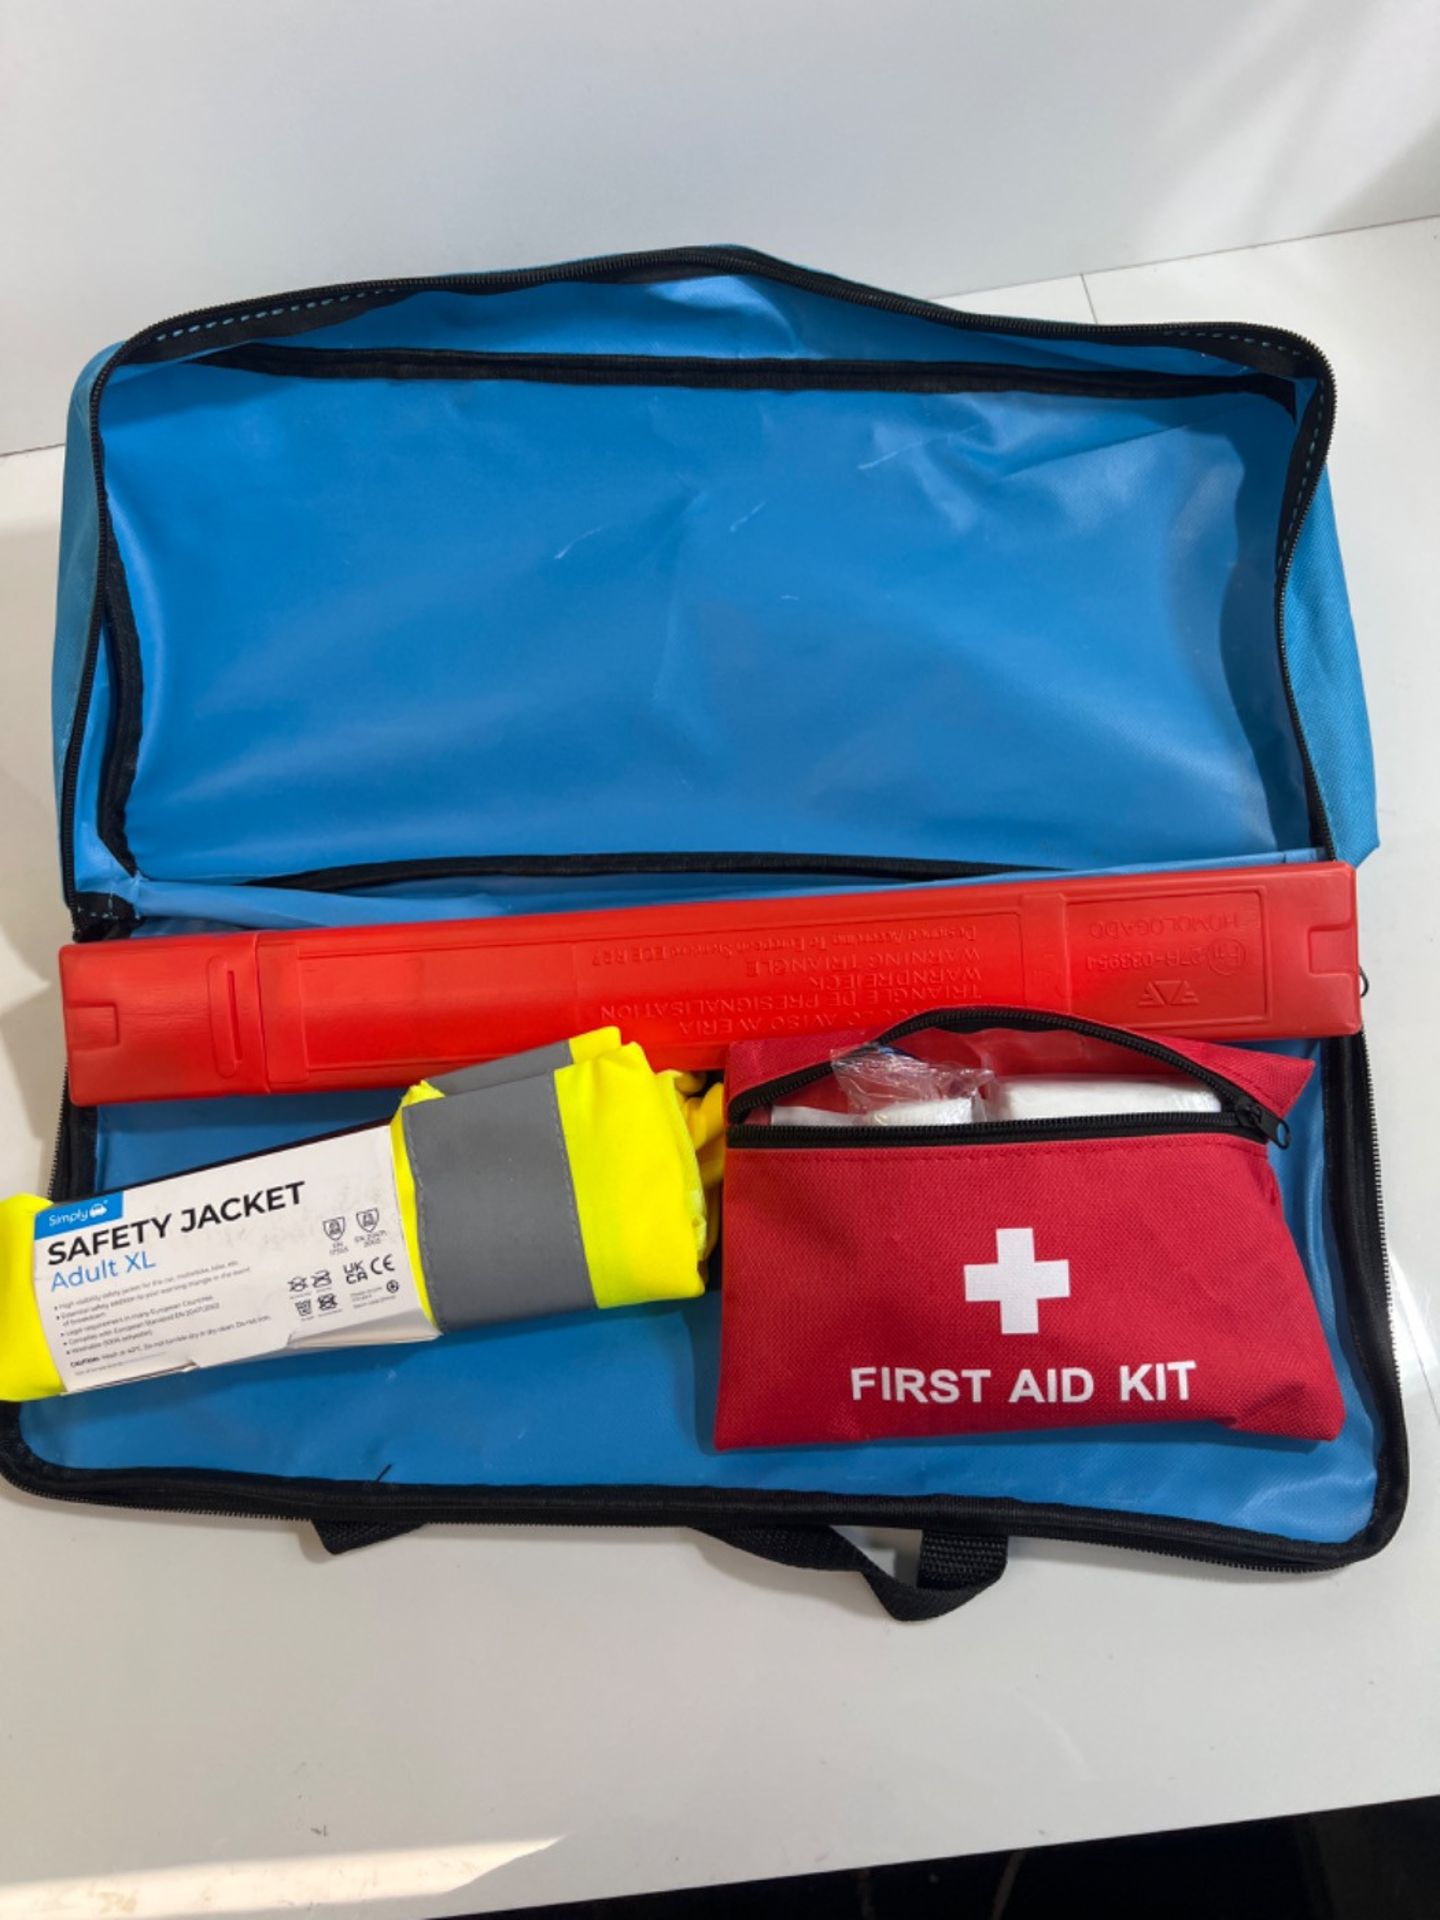 Simply ETK1 Europe Travel Kit. 7 Piece Set includes Warning Triangle, Reflective Vest, Headlight Be - Image 3 of 3